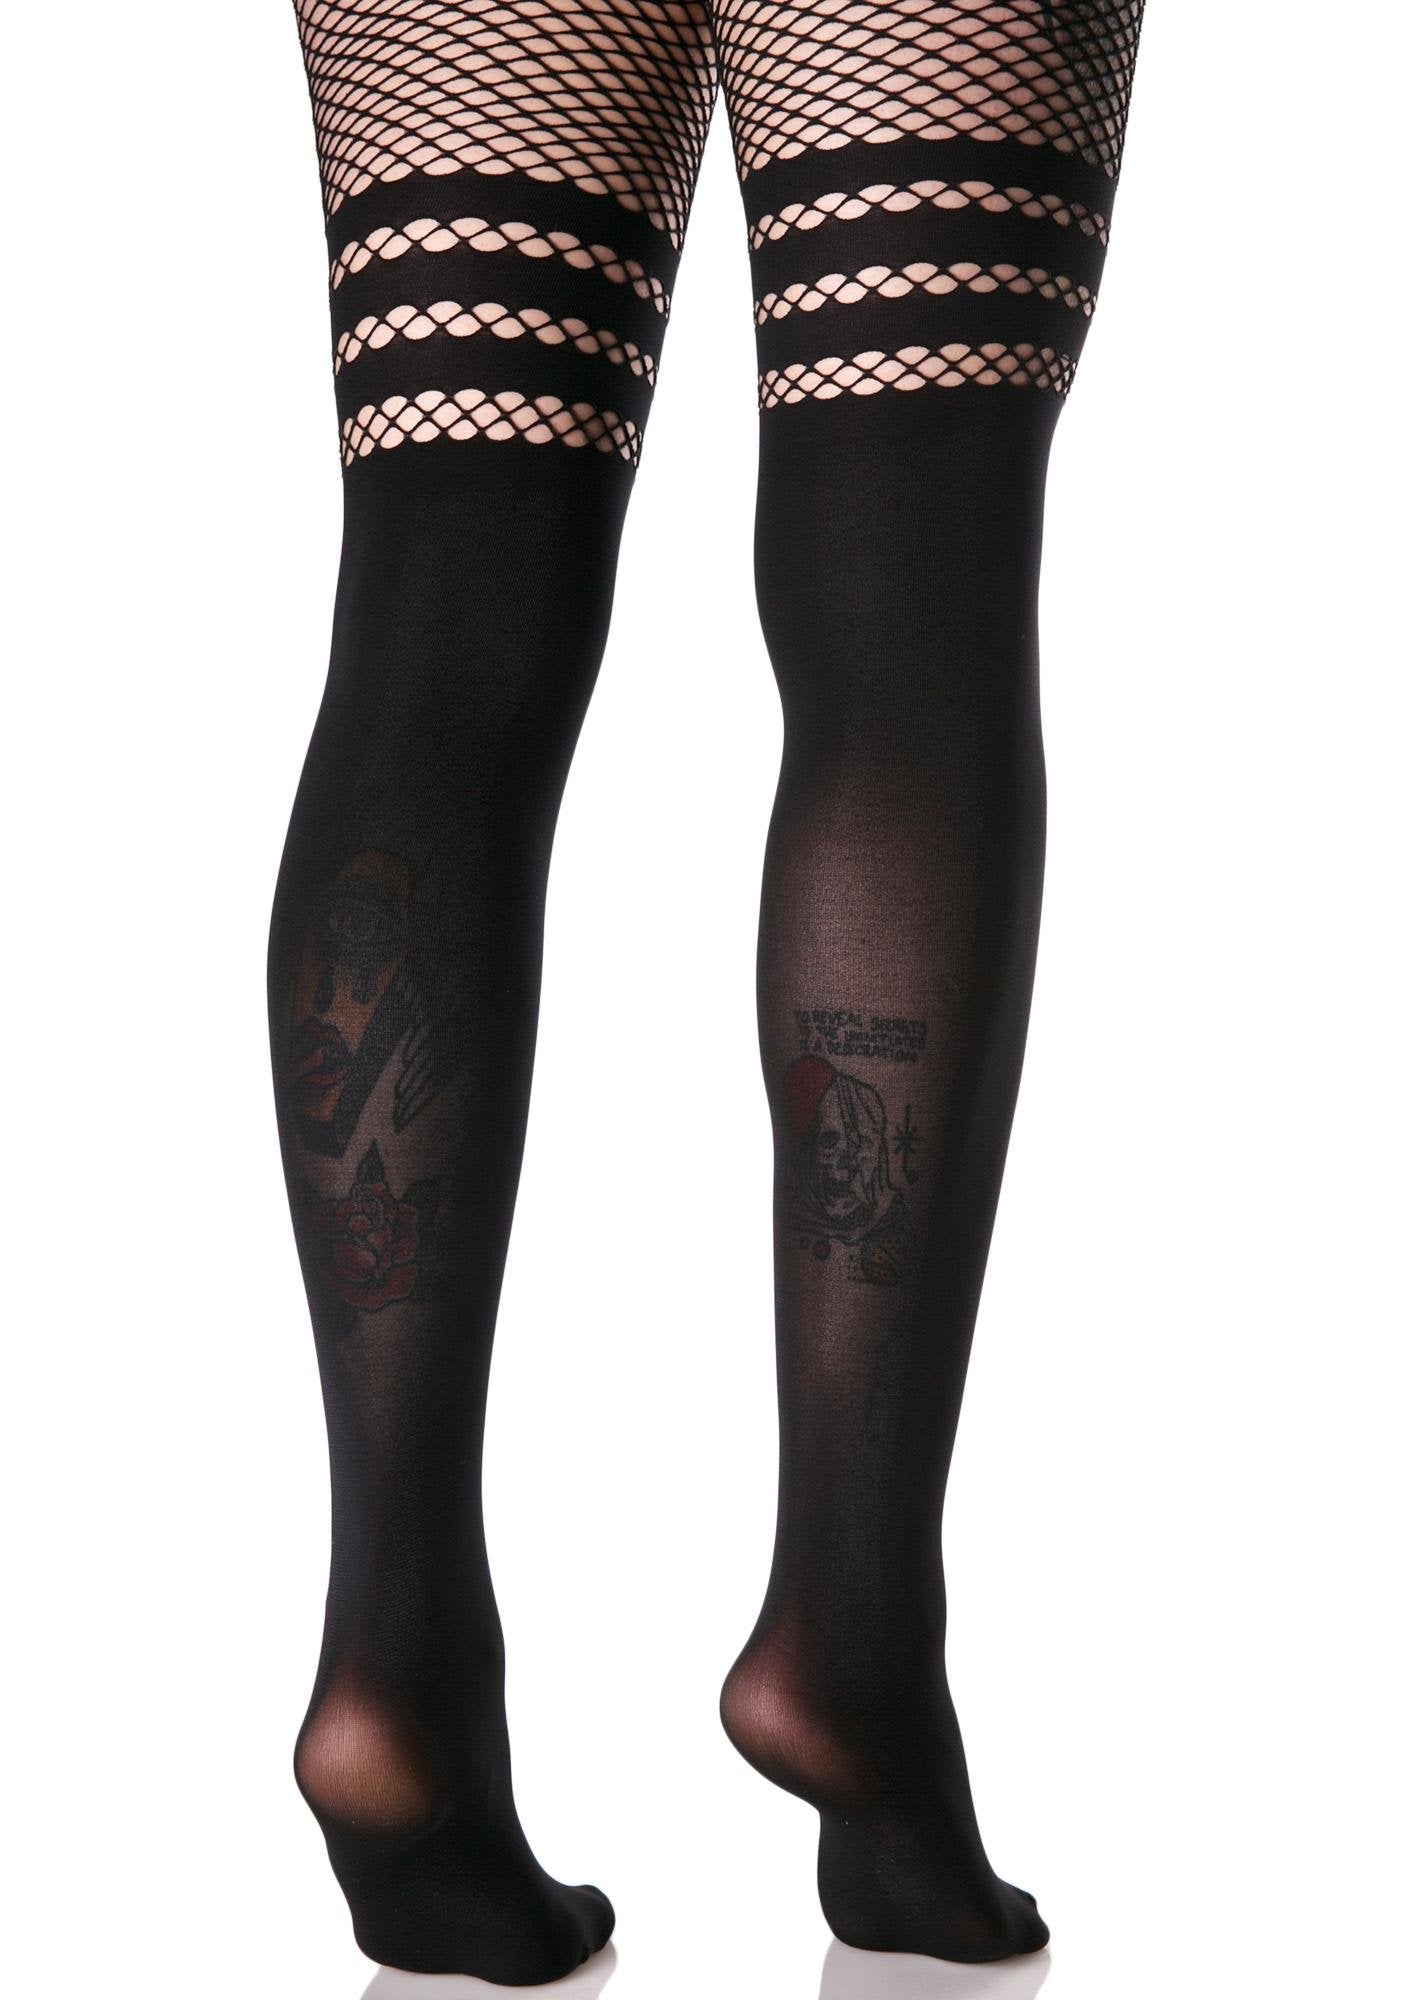 Faux Thigh High Stockings with Fishnet in Black - The Sugarpuss Collection